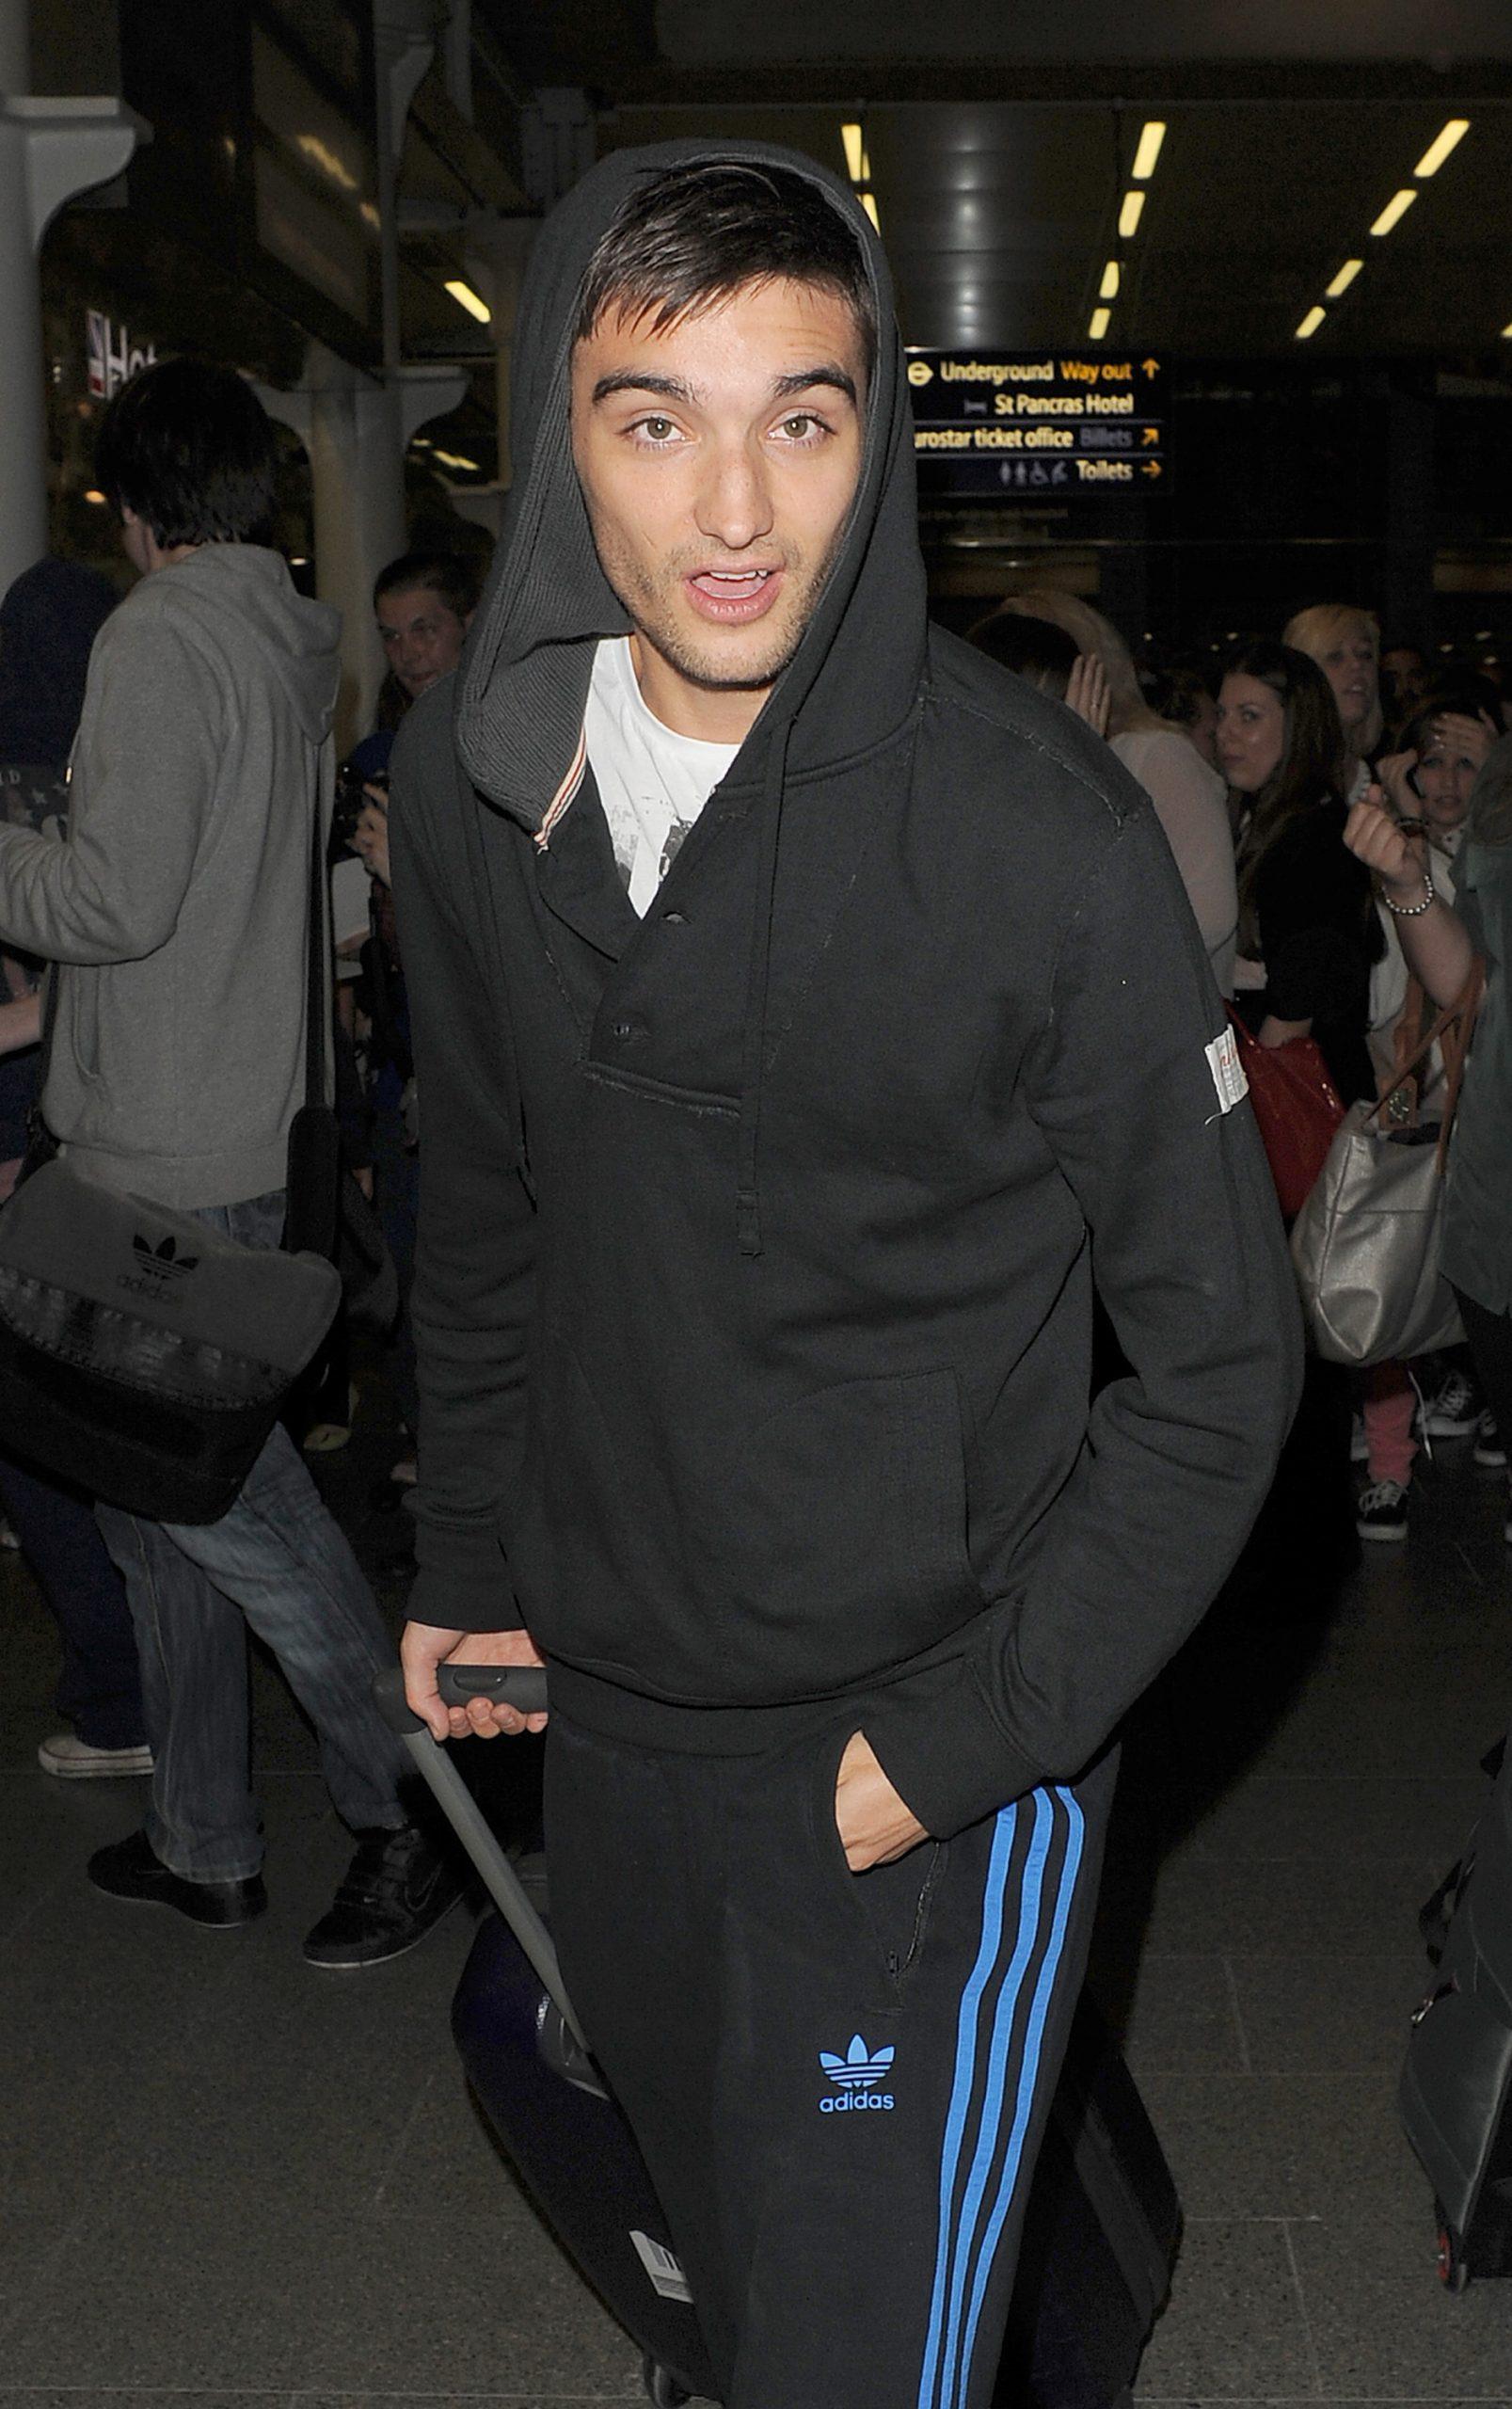 Tom Parker of The Wanted boy band